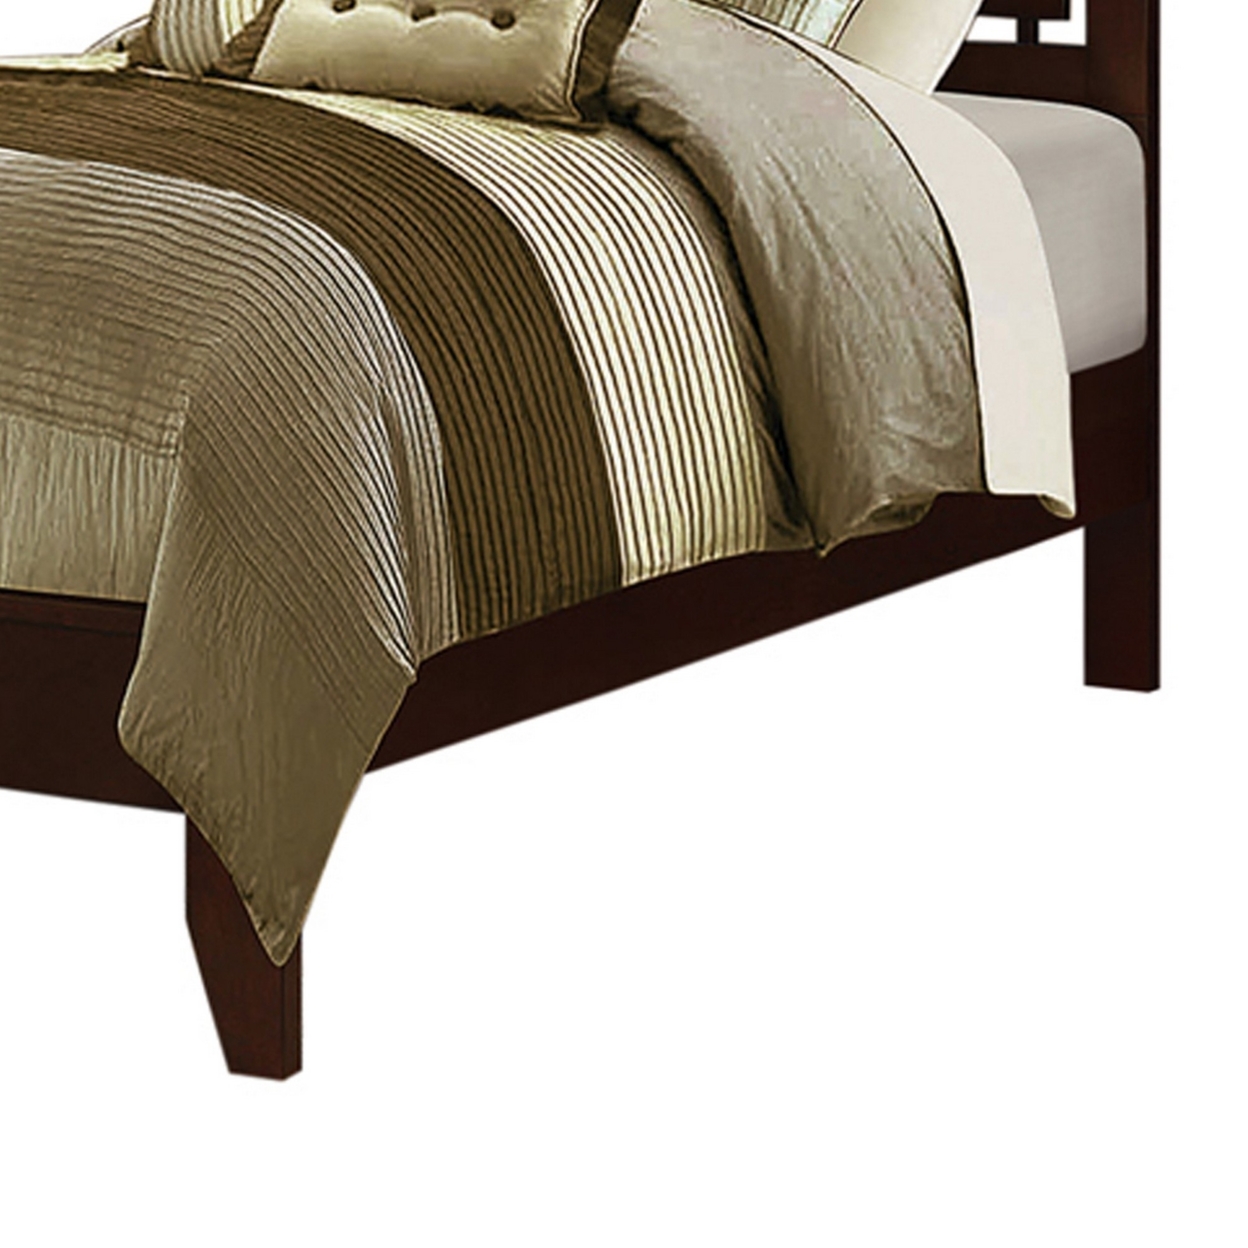 Wooden Frame Twin Size Bed With Cut Out Panel Headboard, Brown- Saltoro Sherpi